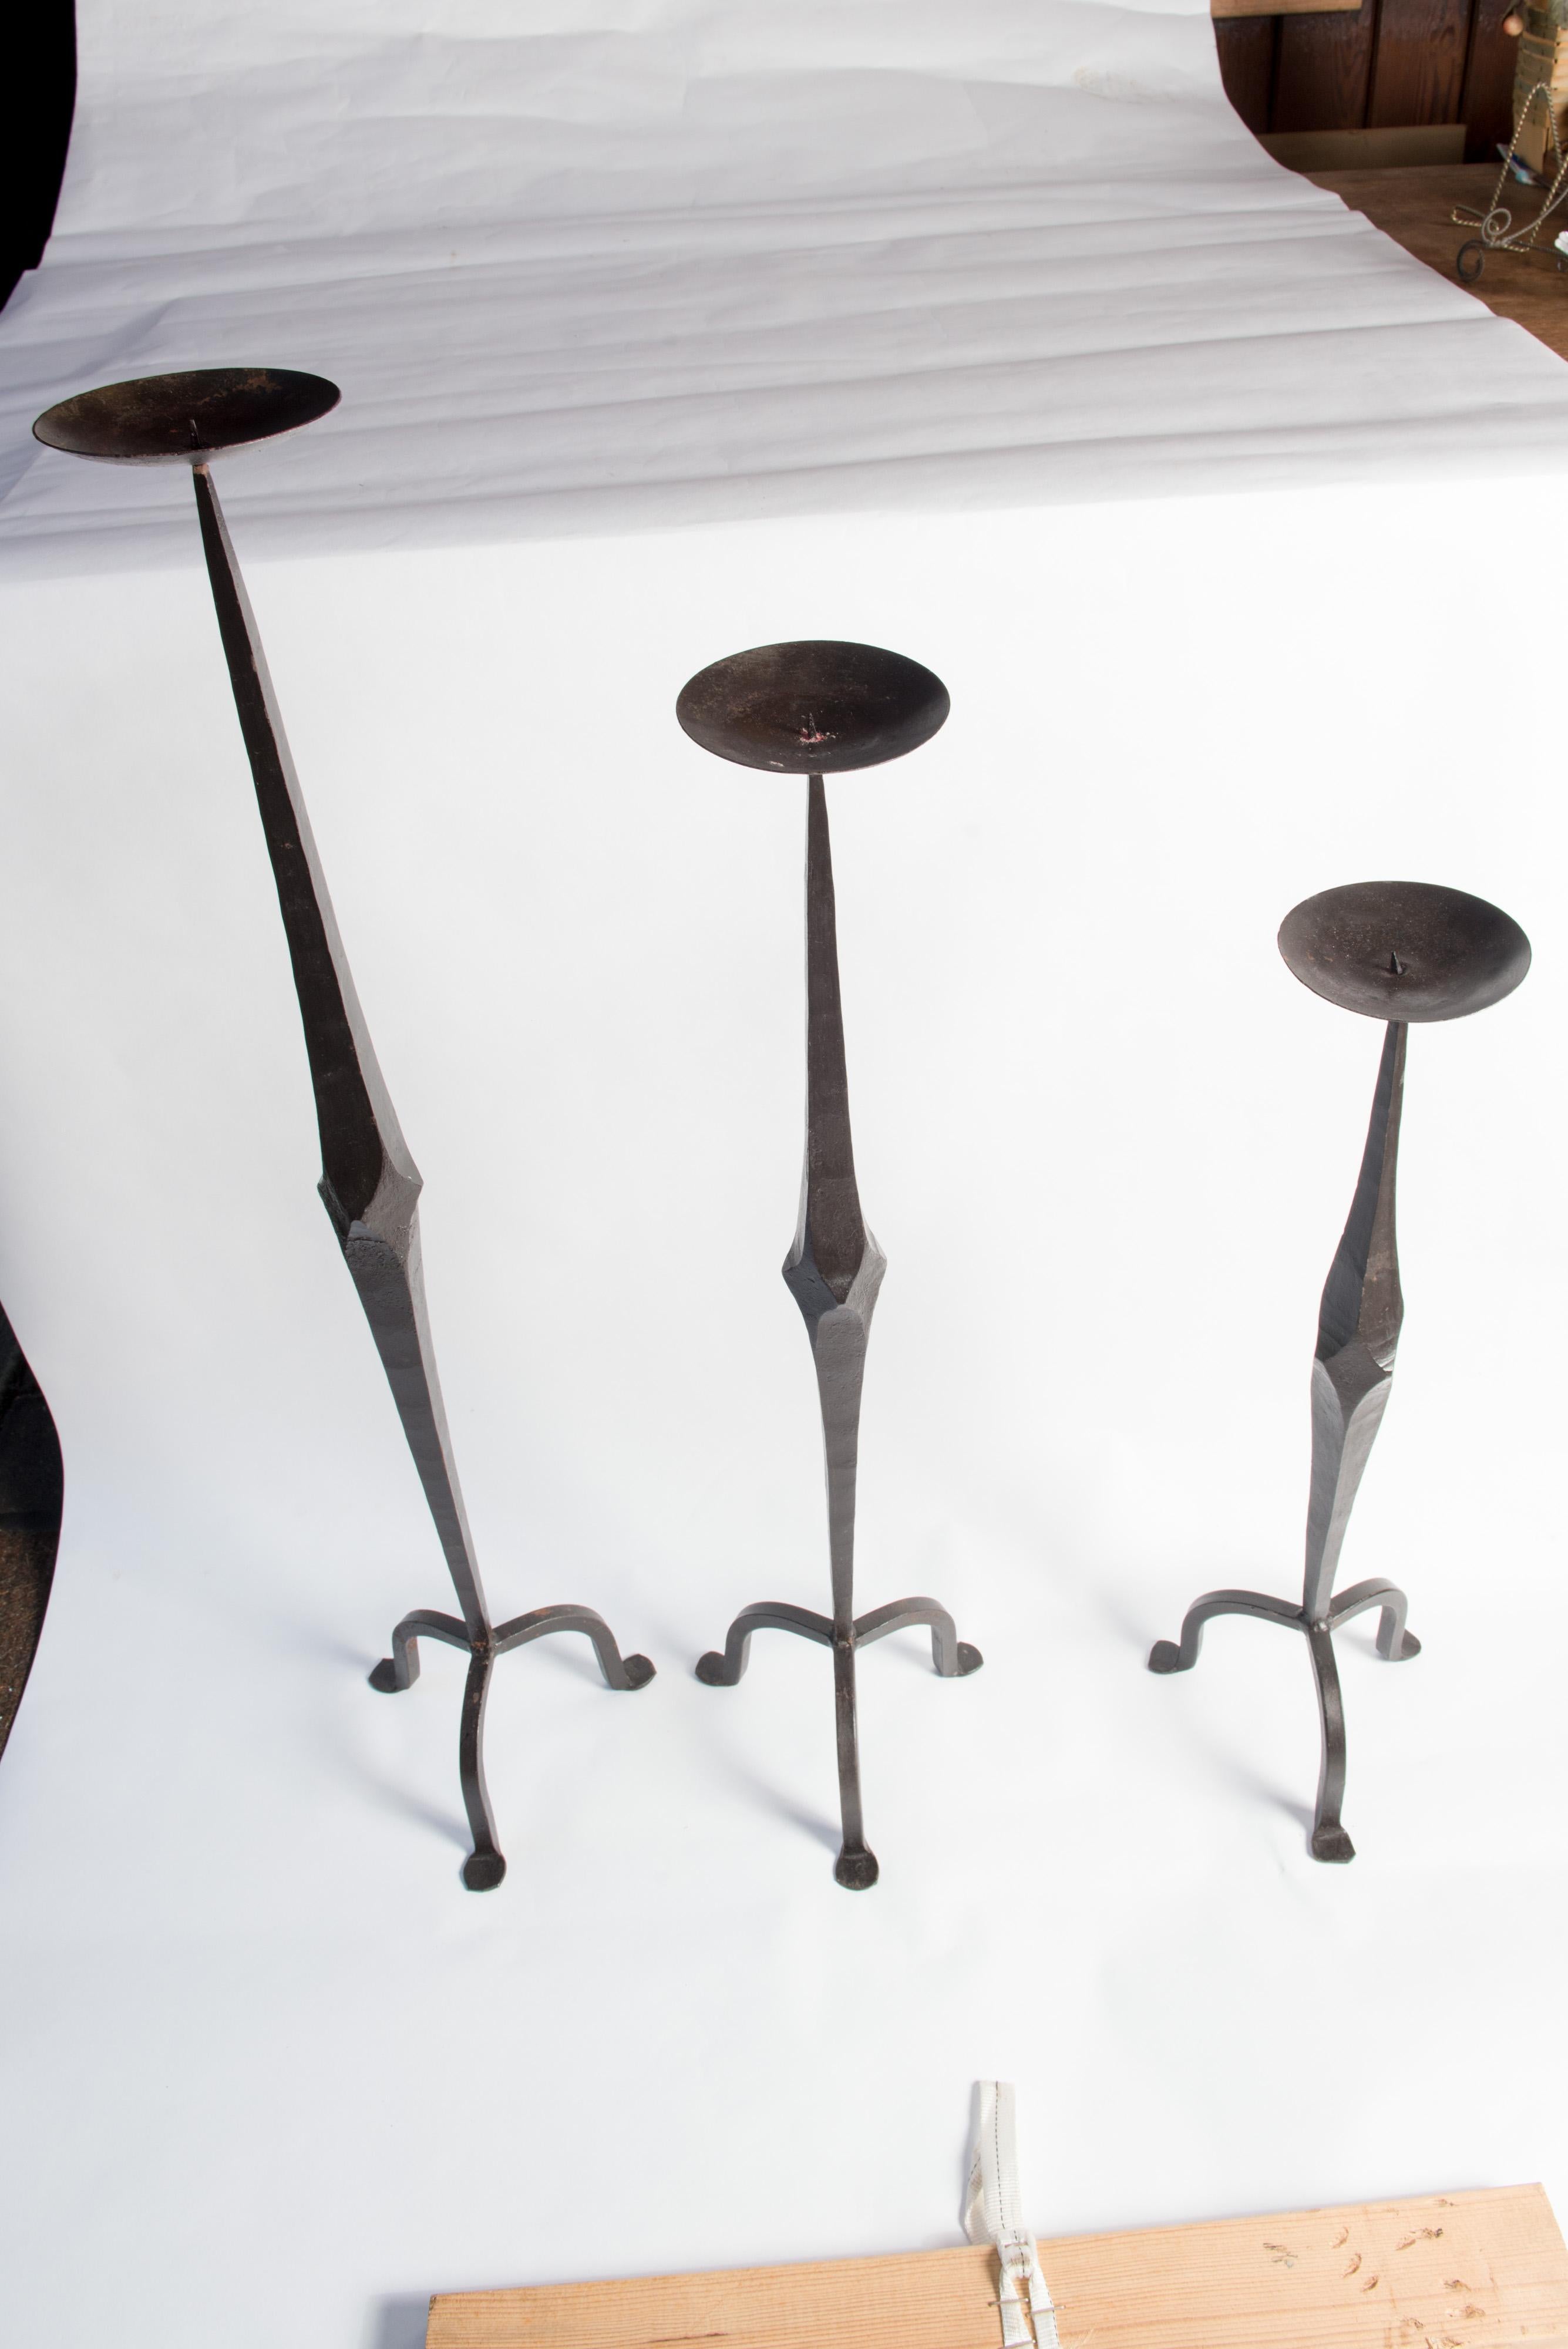 A set of three large floor standing hand wrought iron torchere candle holders from the 1960s.
Heights: 30